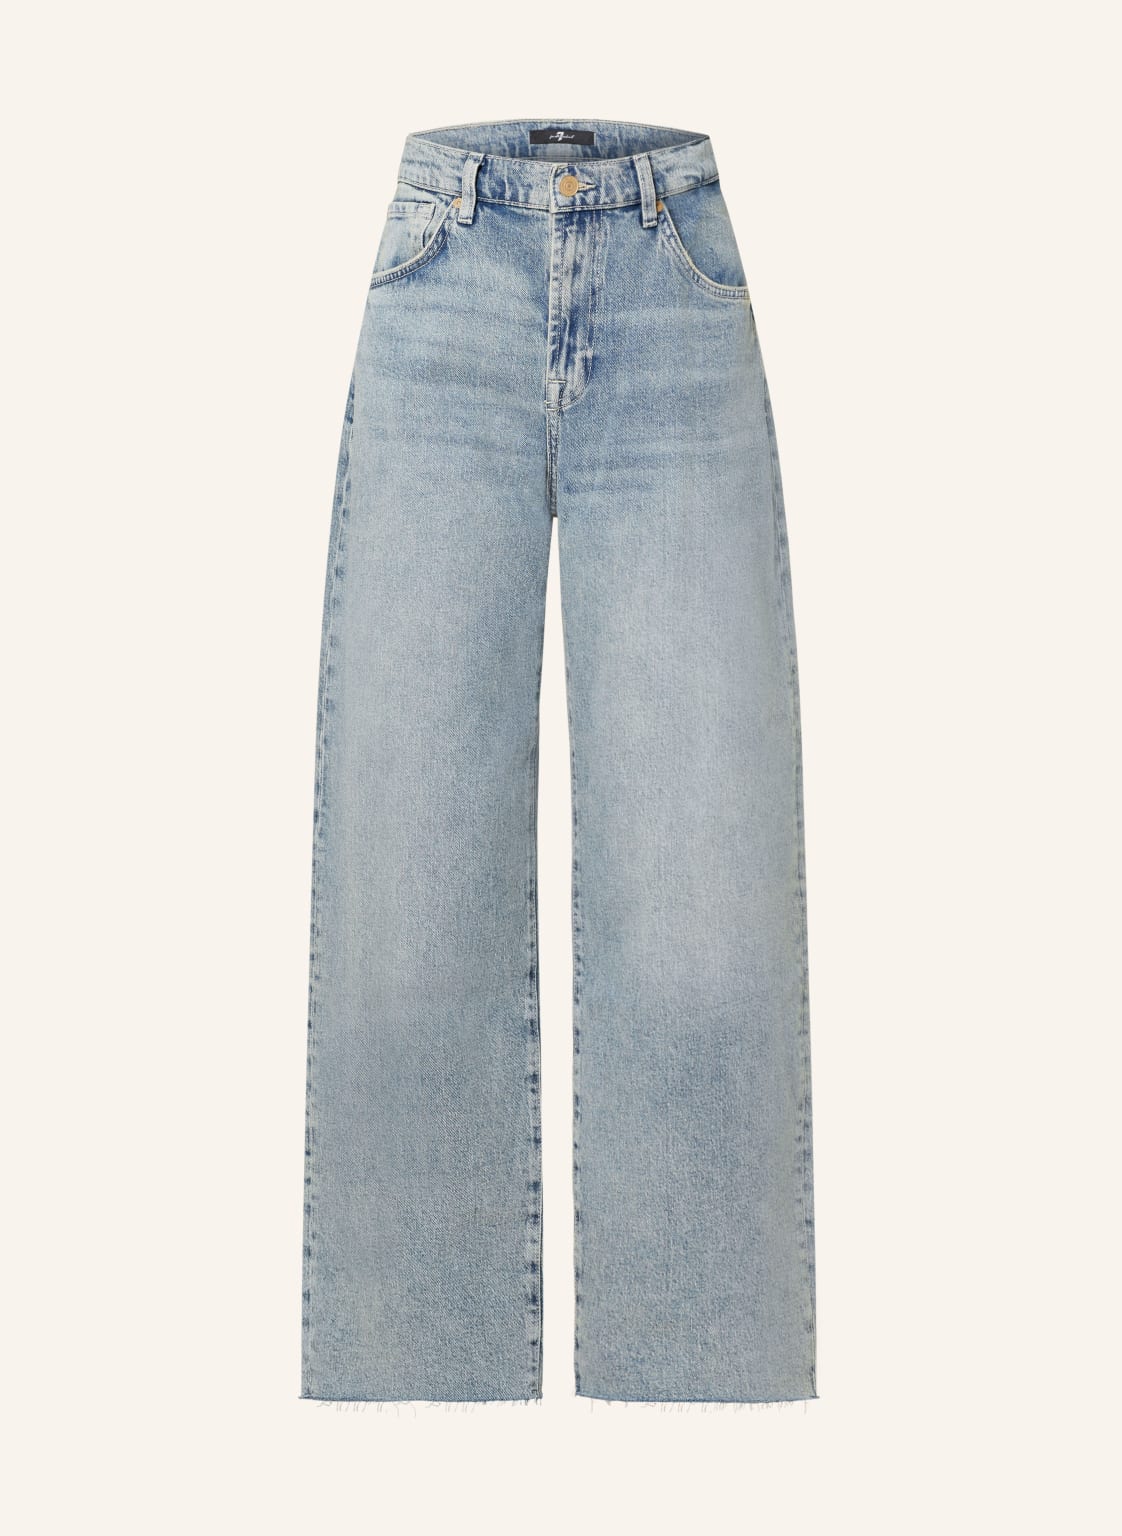 7 For All Mankind Jeans Bonnie Curvilinear blau von 7 For All Mankind